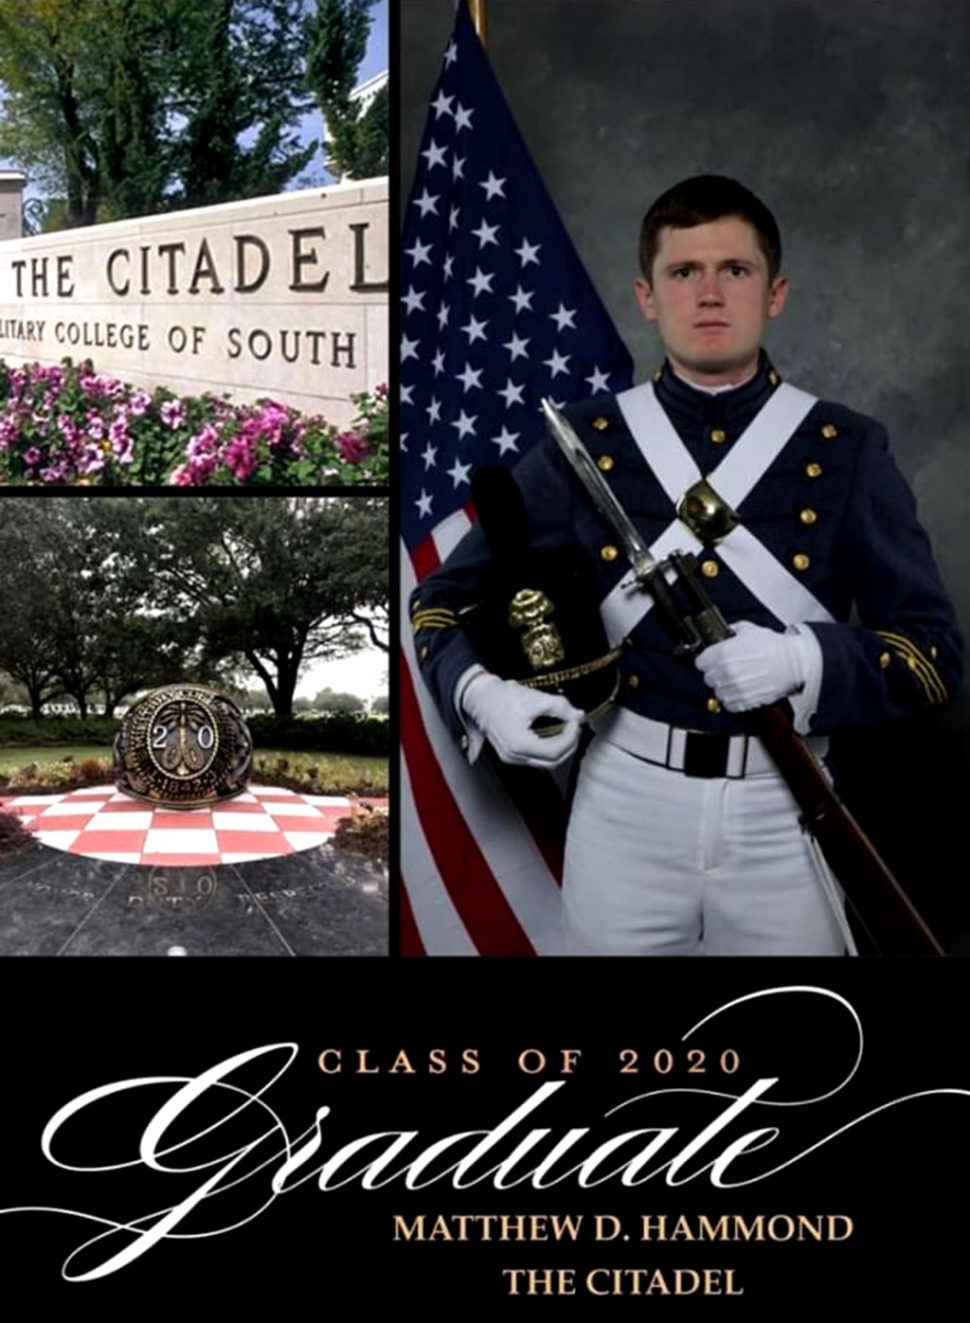 What do Charleston, South Carolina and Fillmore, CA have in common? They have one student, Matthew Hammond, who graduated from schools in both cities, 2500 miles apart. Matthew attended Sespe Elementary, Fillmore Middle and graduated from Fillmore High School in 2016. He then went on to attend The Citadel Military College in Charleston, South Carolina after receiving an Army ROTC National Scholarship. Via an online ceremony, on Saturday, May 9, 2020 at 10am he graduated from The Citadel after completing the last two months of his senior year online education due to COVID-19. Also online, at 2pm on Saturday, May 9, 2020 he was commissioned into the Army as a 2nd Lieutenant. Come late October 2020 he will begin his training as a Field Artillery Officer at Fort Sill, Oklahoma.